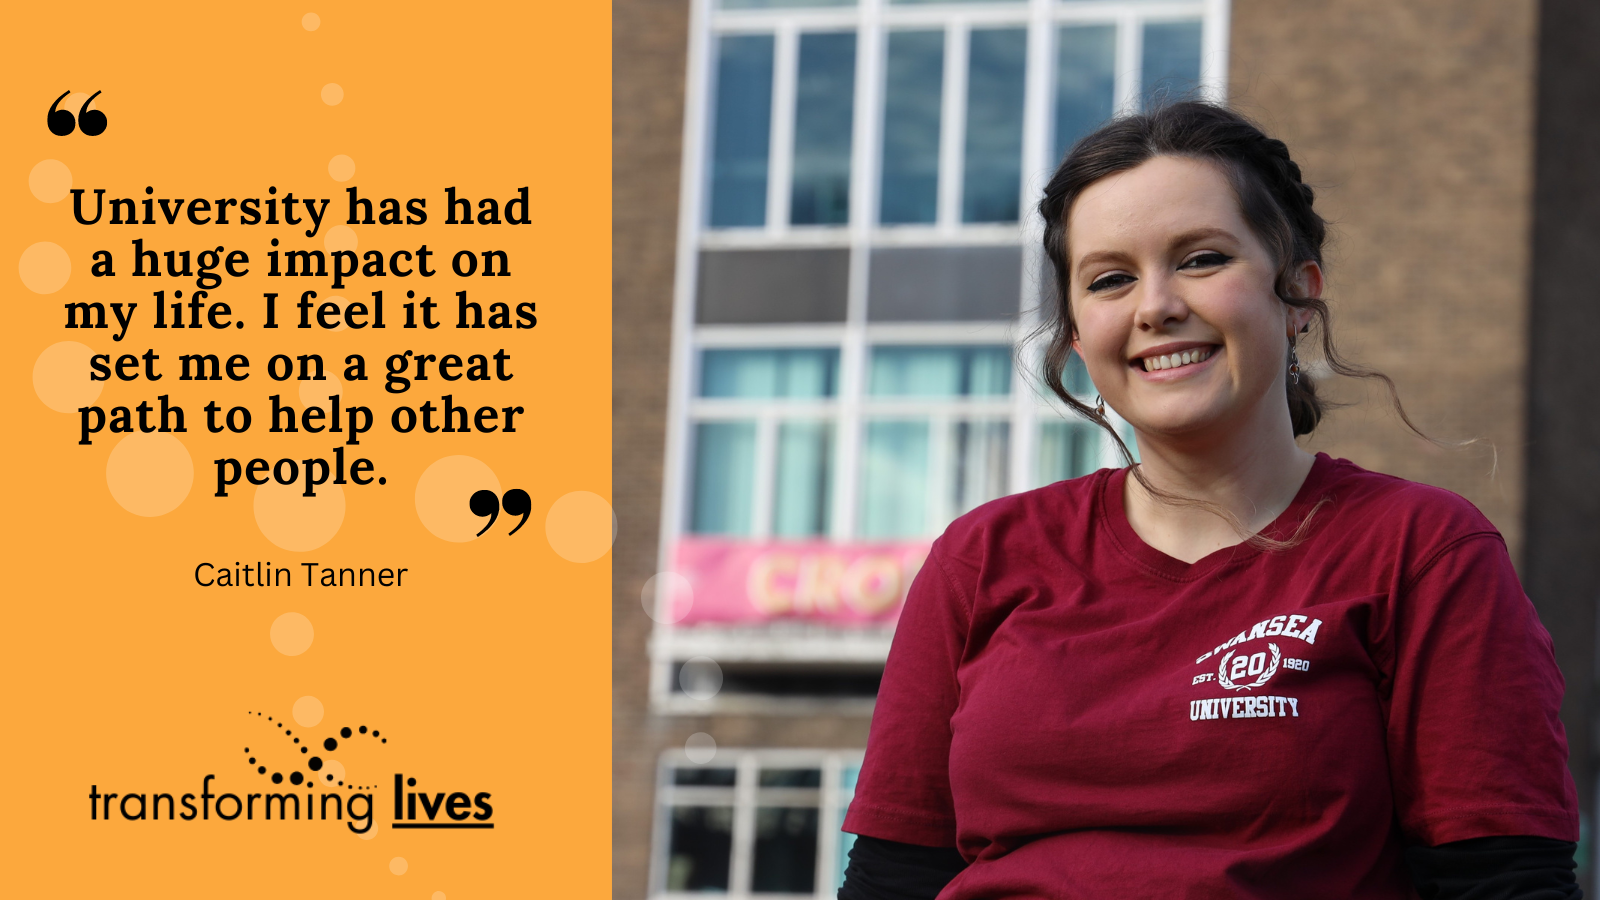 "University has had a huge impact on my life. I feel it has set me on a great path to help other people.”